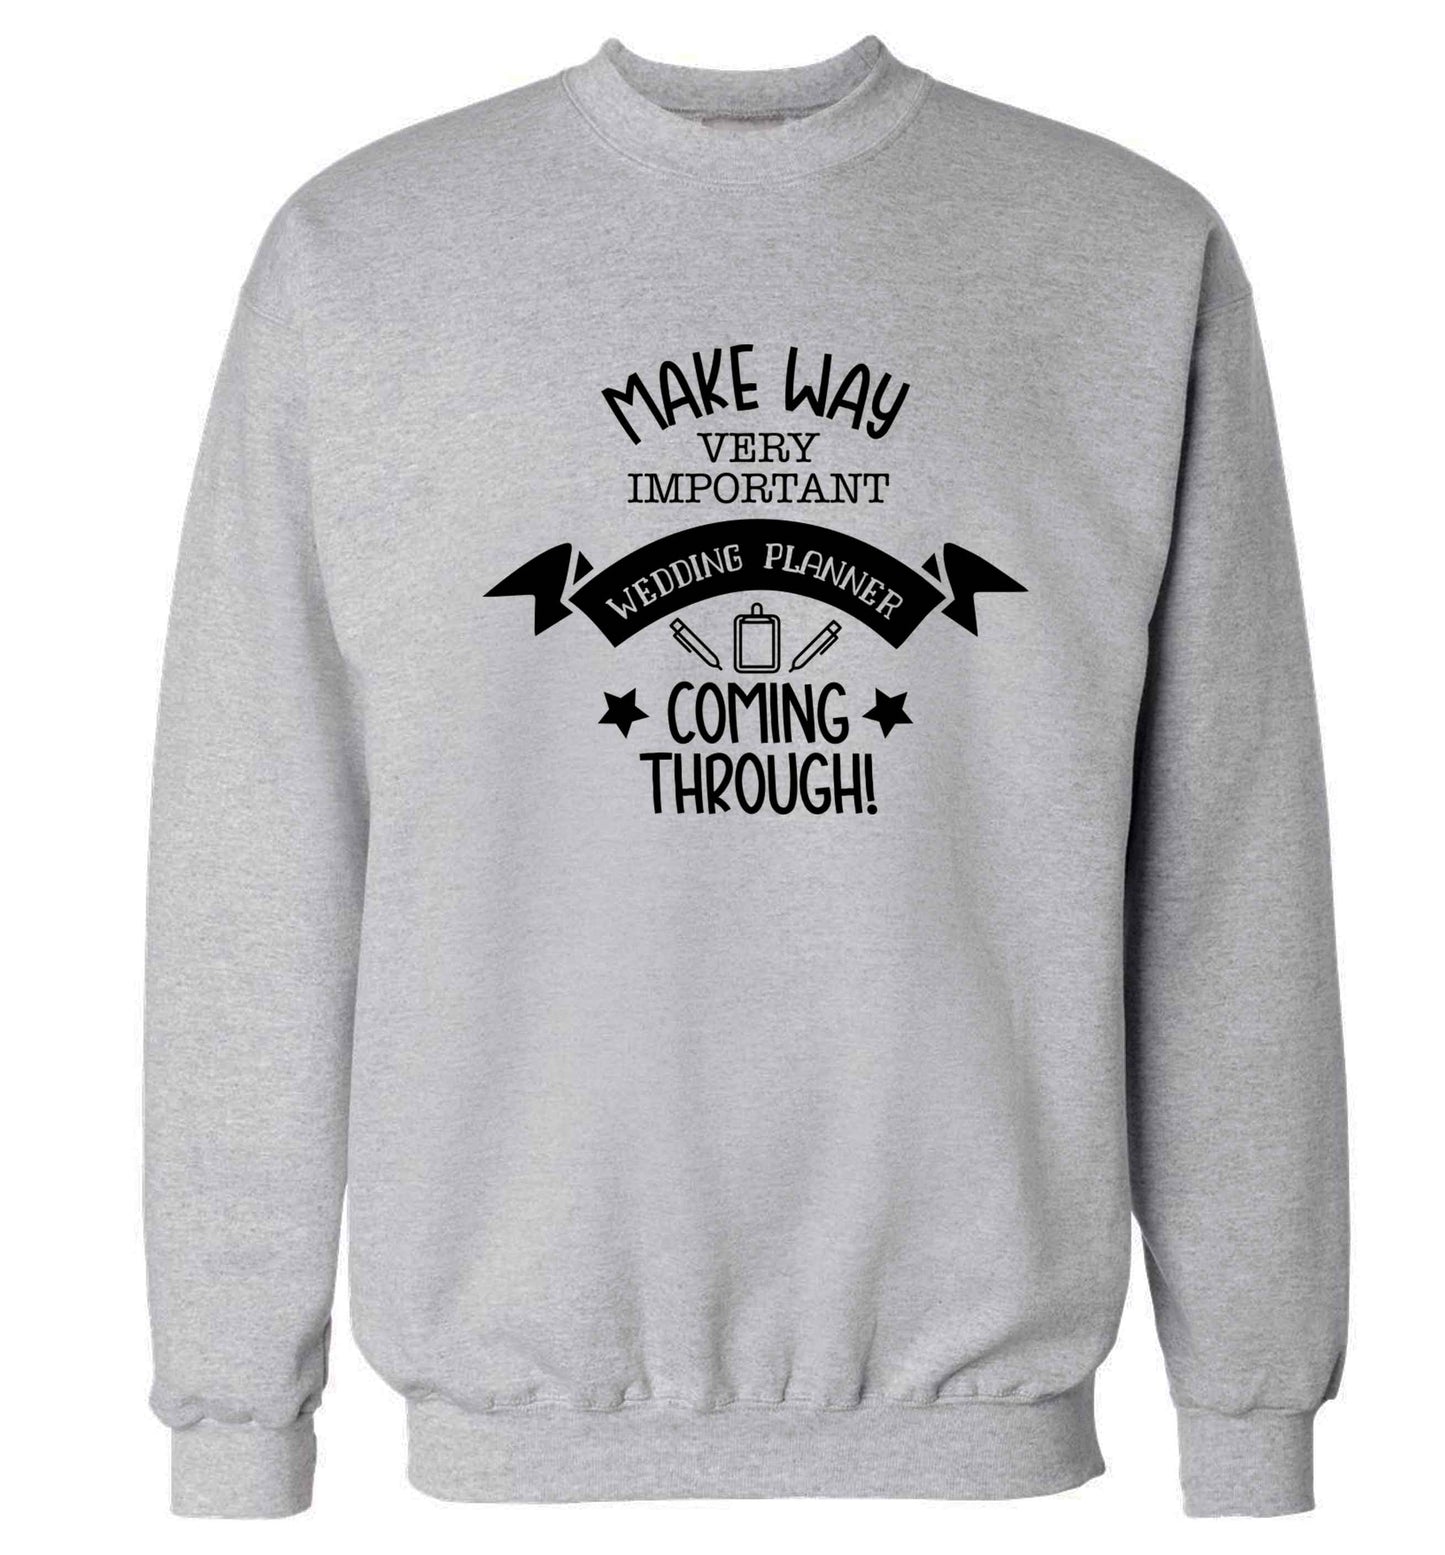 Make way very important wedding planner coming through Adult's unisex grey Sweater 2XL